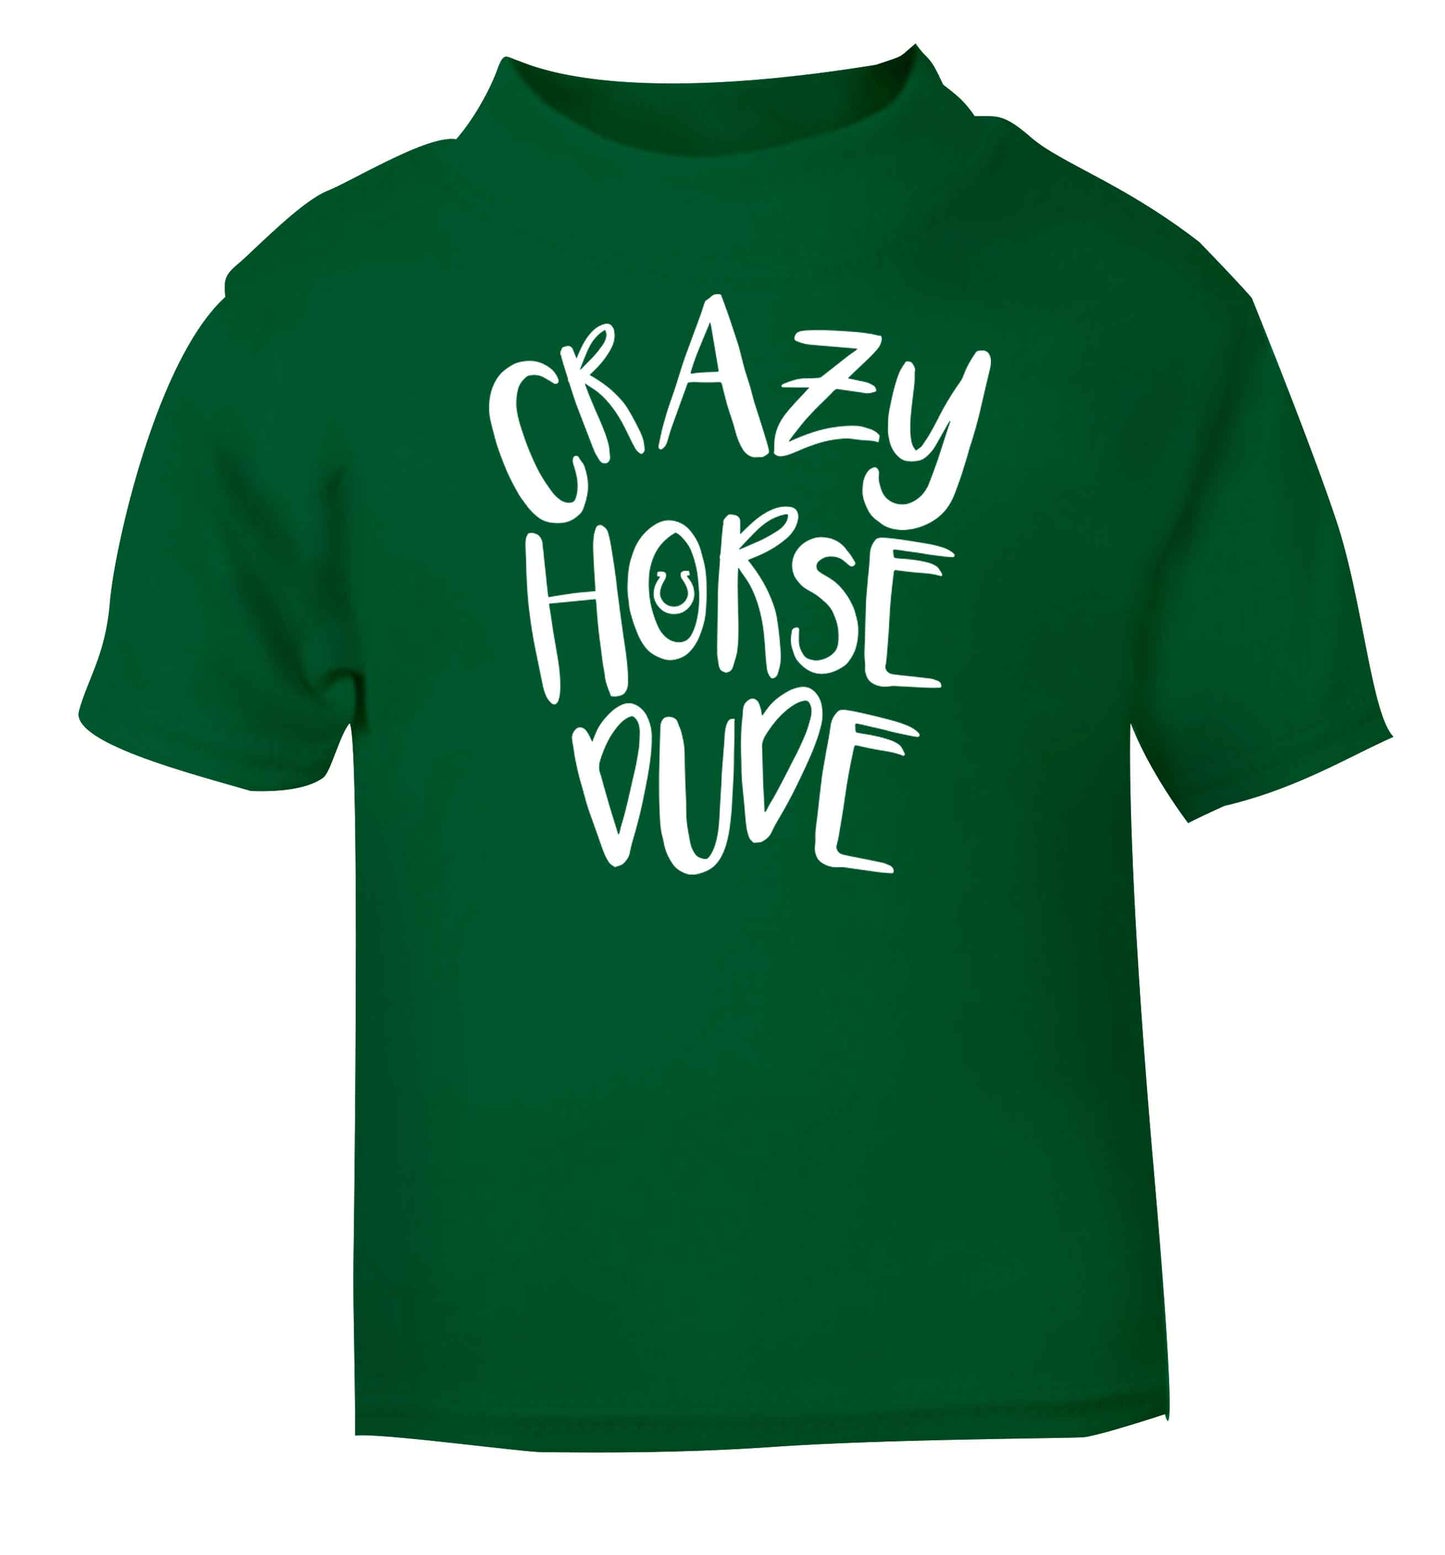 Crazy horse dude green baby toddler Tshirt 2 Years